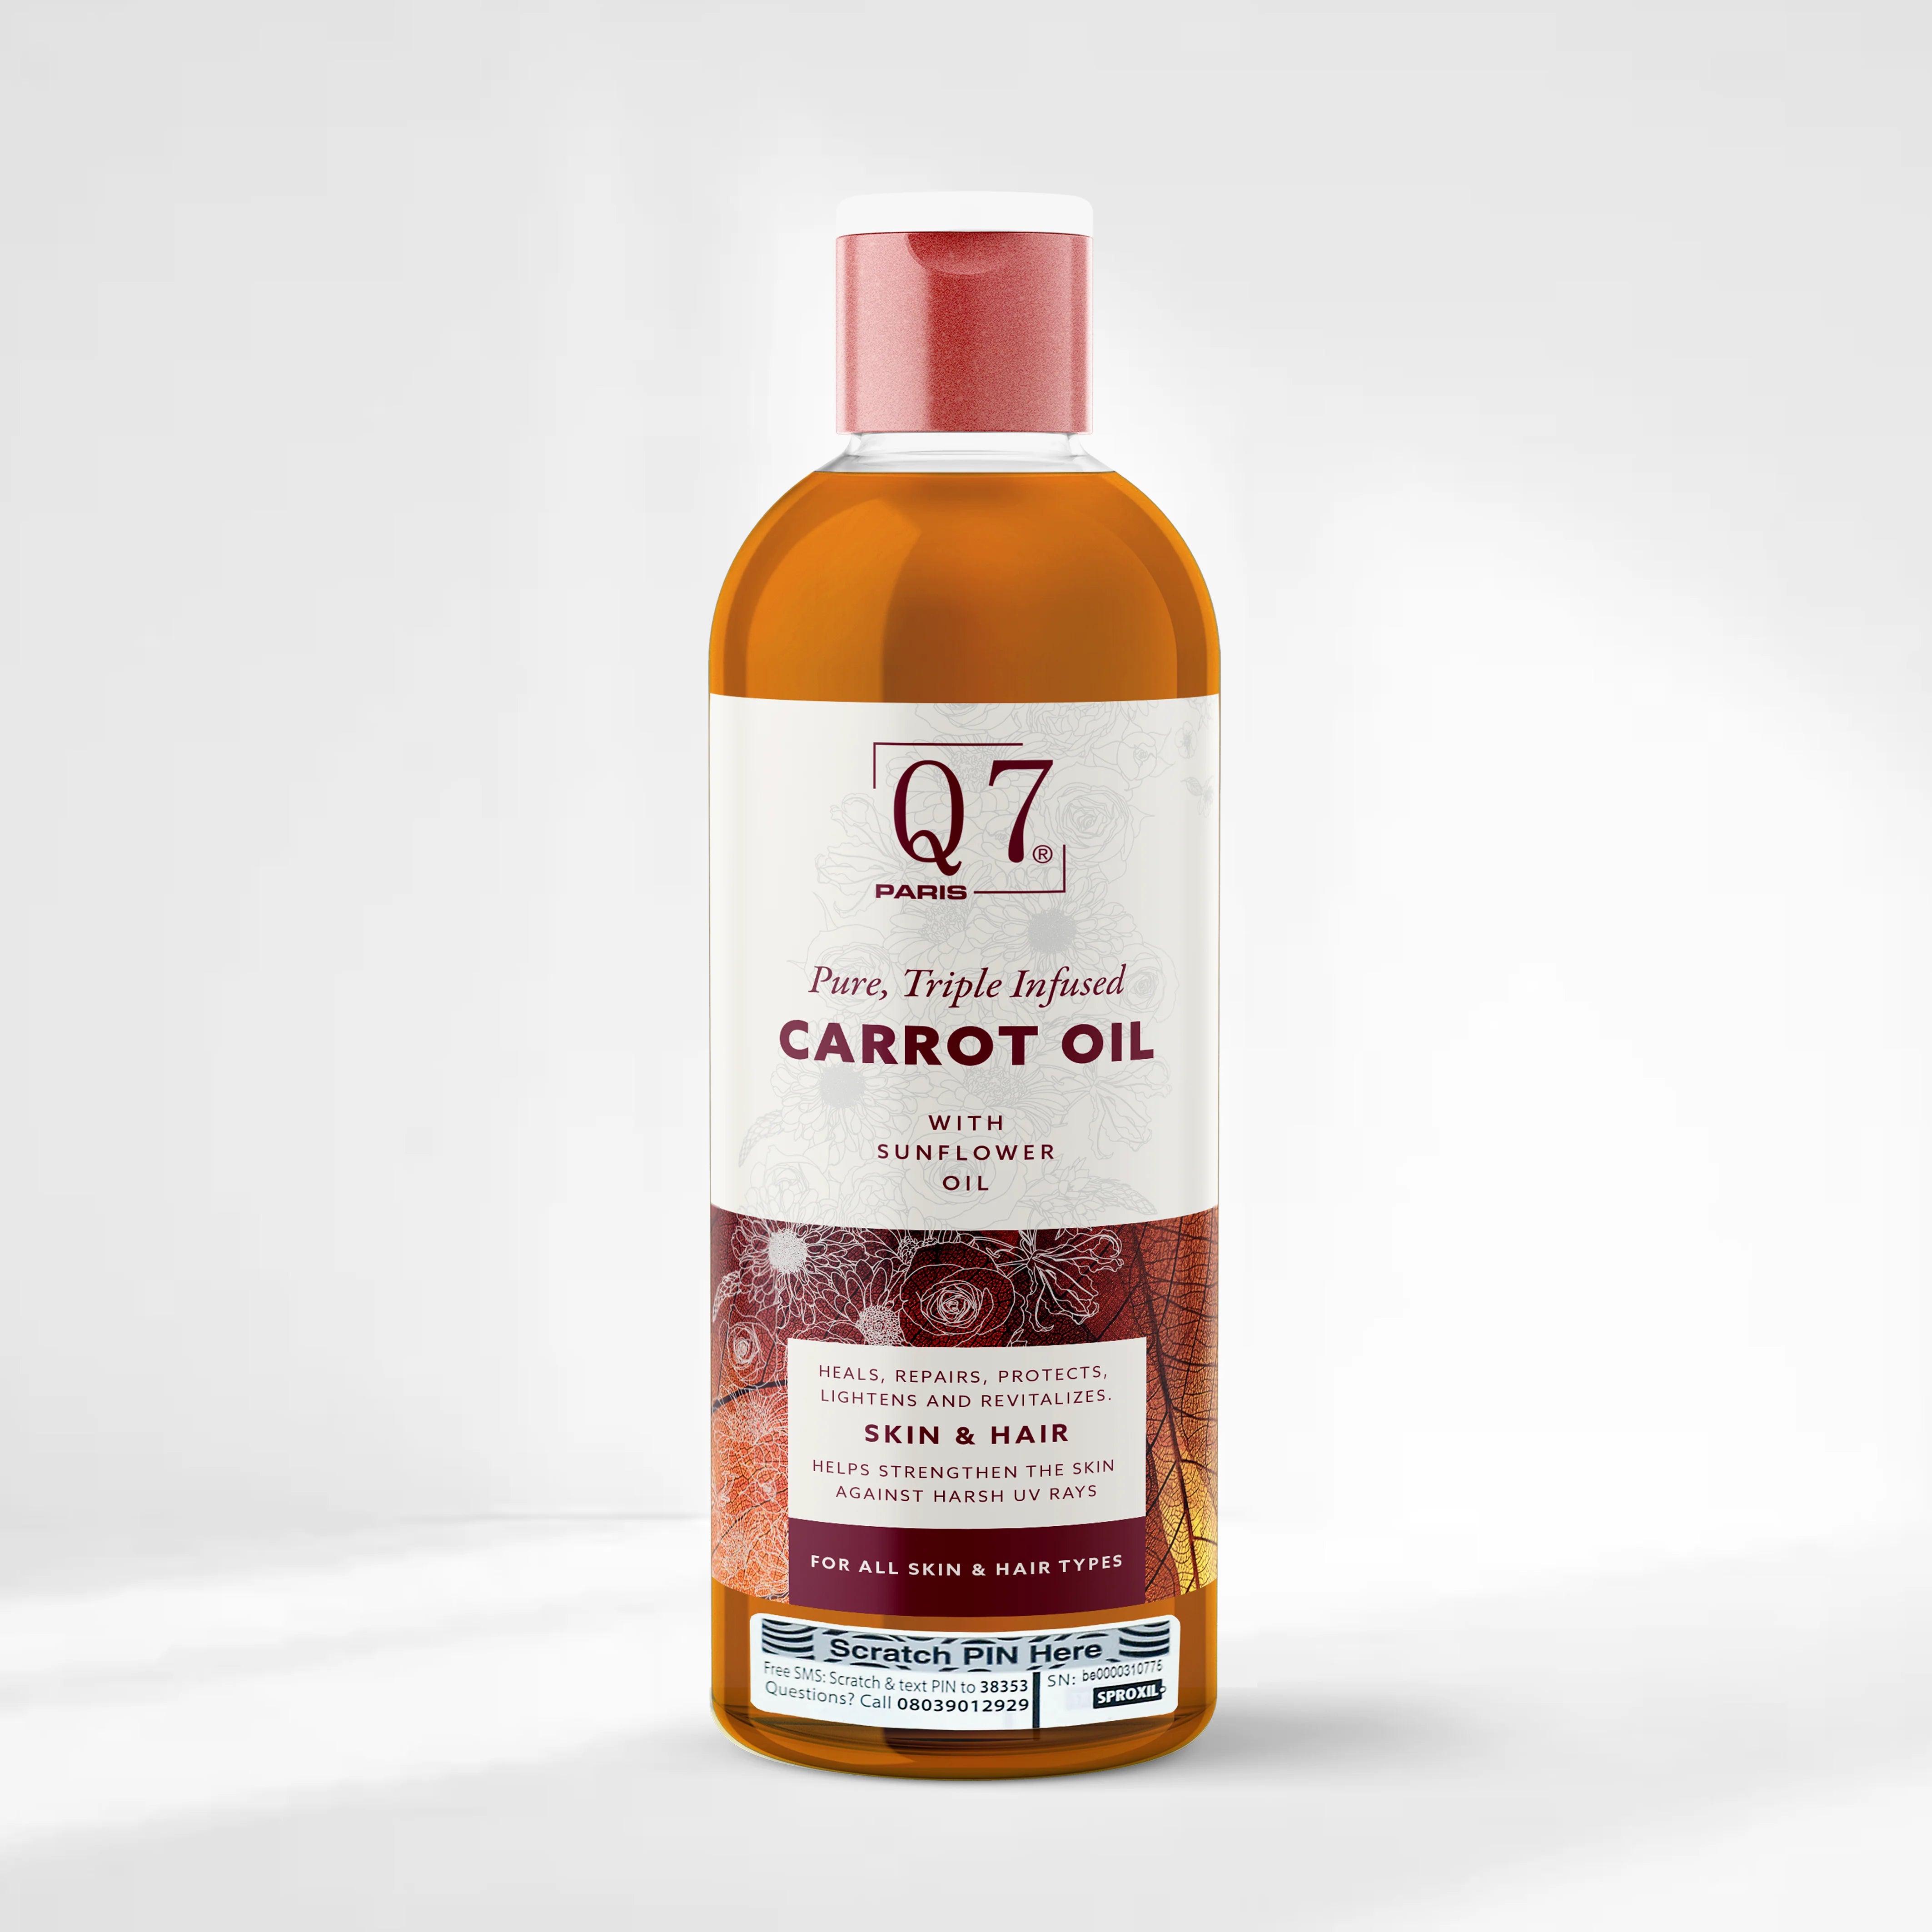 Pure, Triple Infused Carrot Oil – 250ml